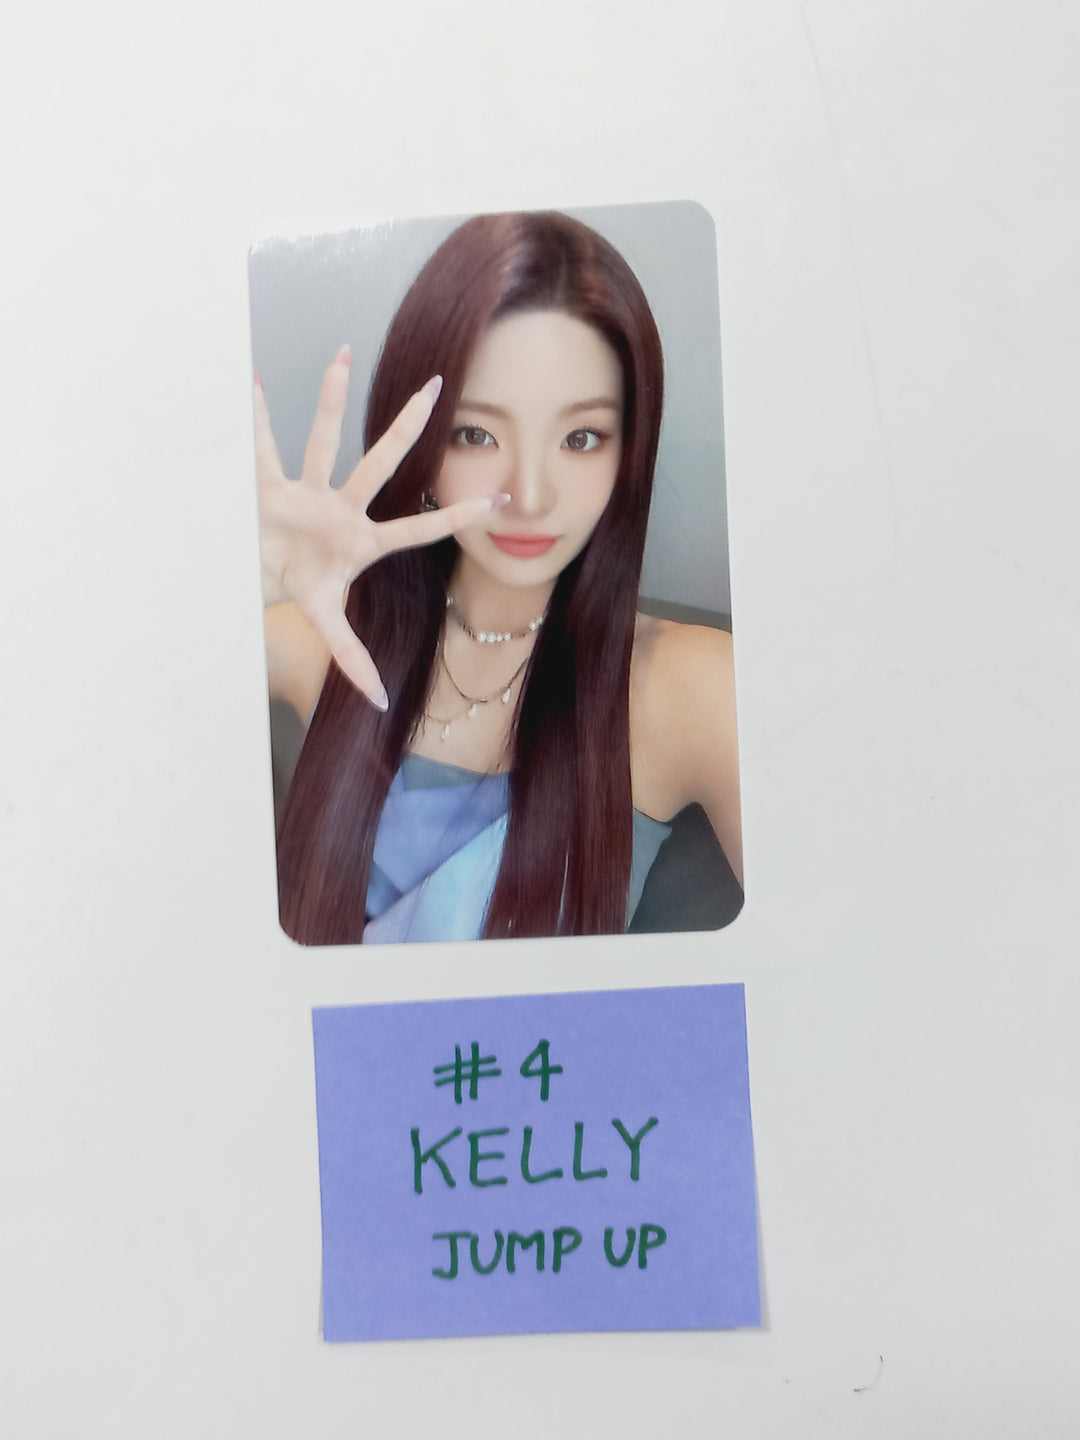 TRI.BE "Diamond" - Jump Up Fansign Event Photocard [24.4.3]